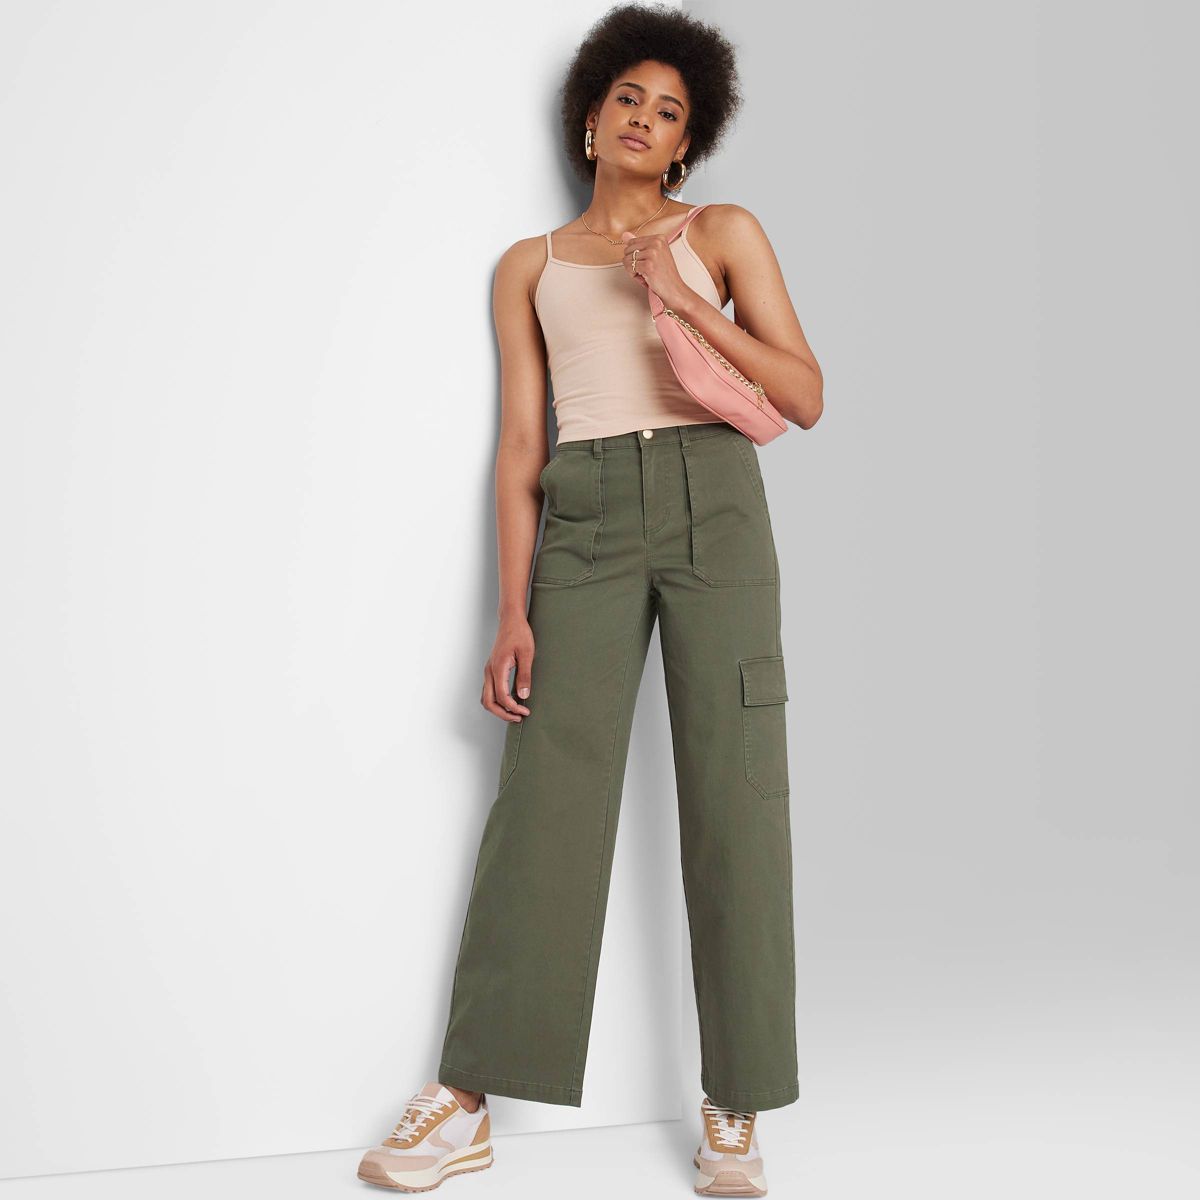 Women's High-Rise Straight Leg Cargo Pants - Wild Fable™ Olive Green S | Target